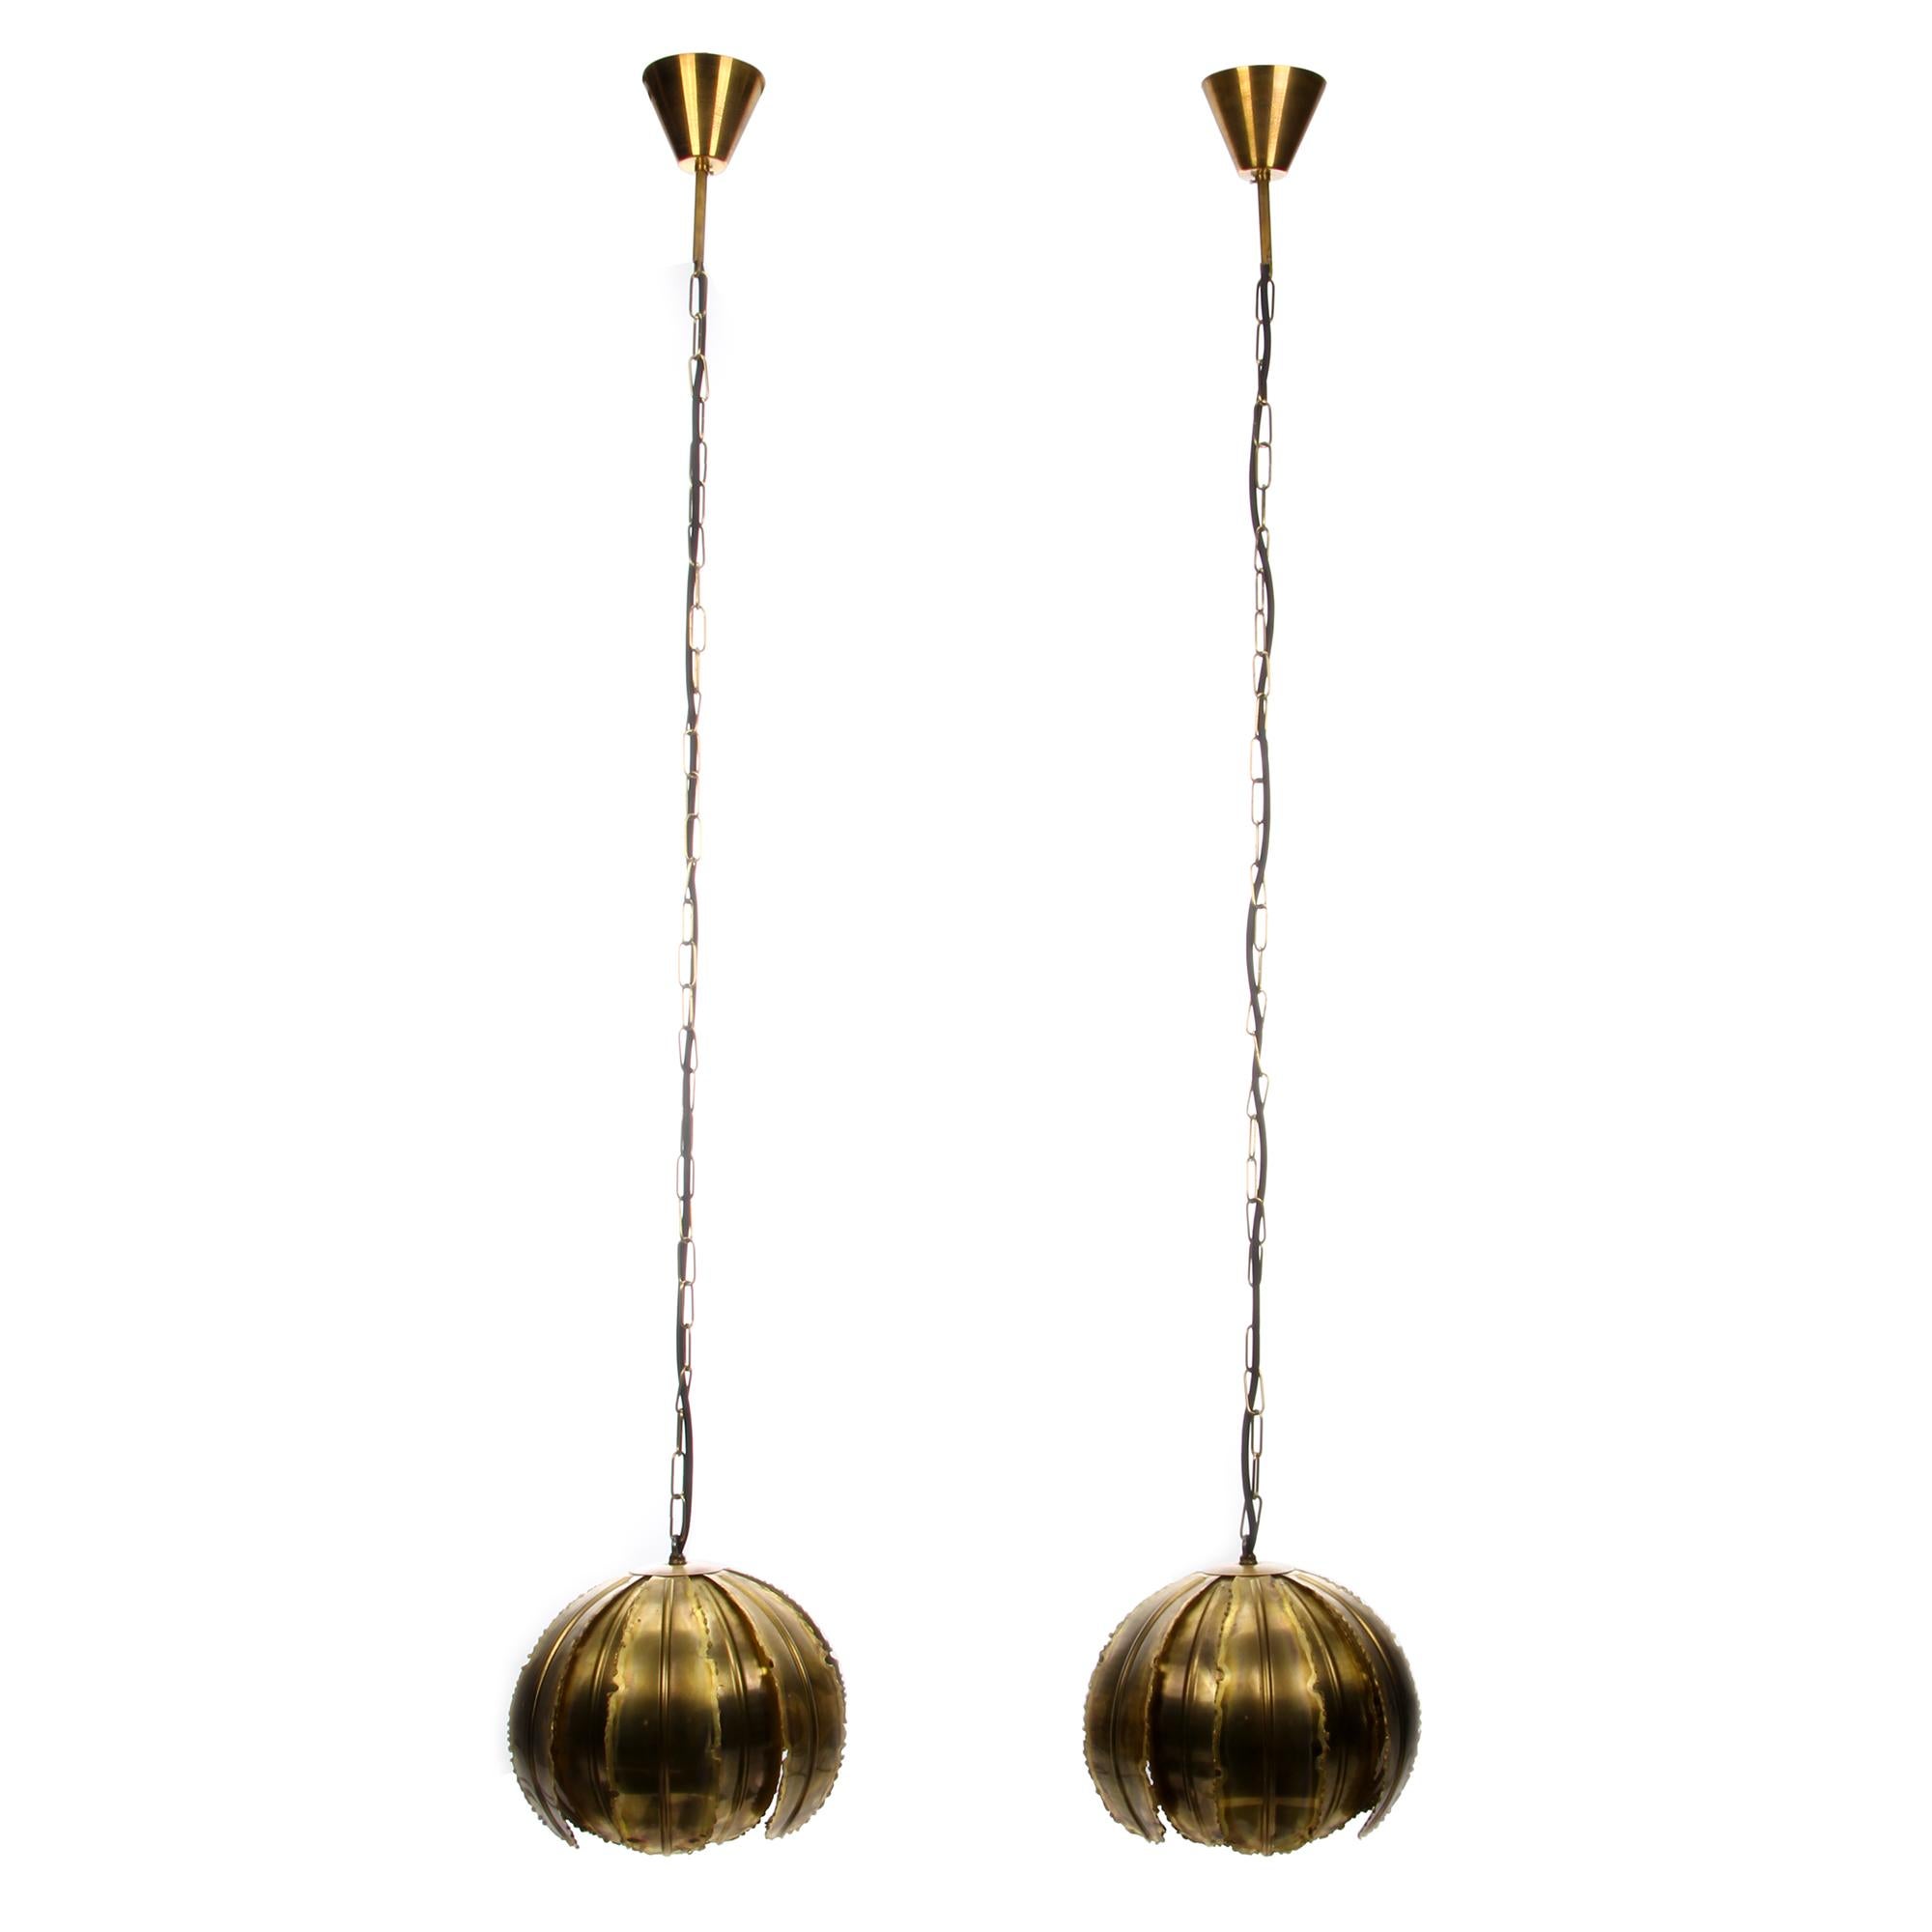 Type 6404 Pendant Pair by Holm Sorensen, Pair of 1960s Brutalist Lamps (Messing)